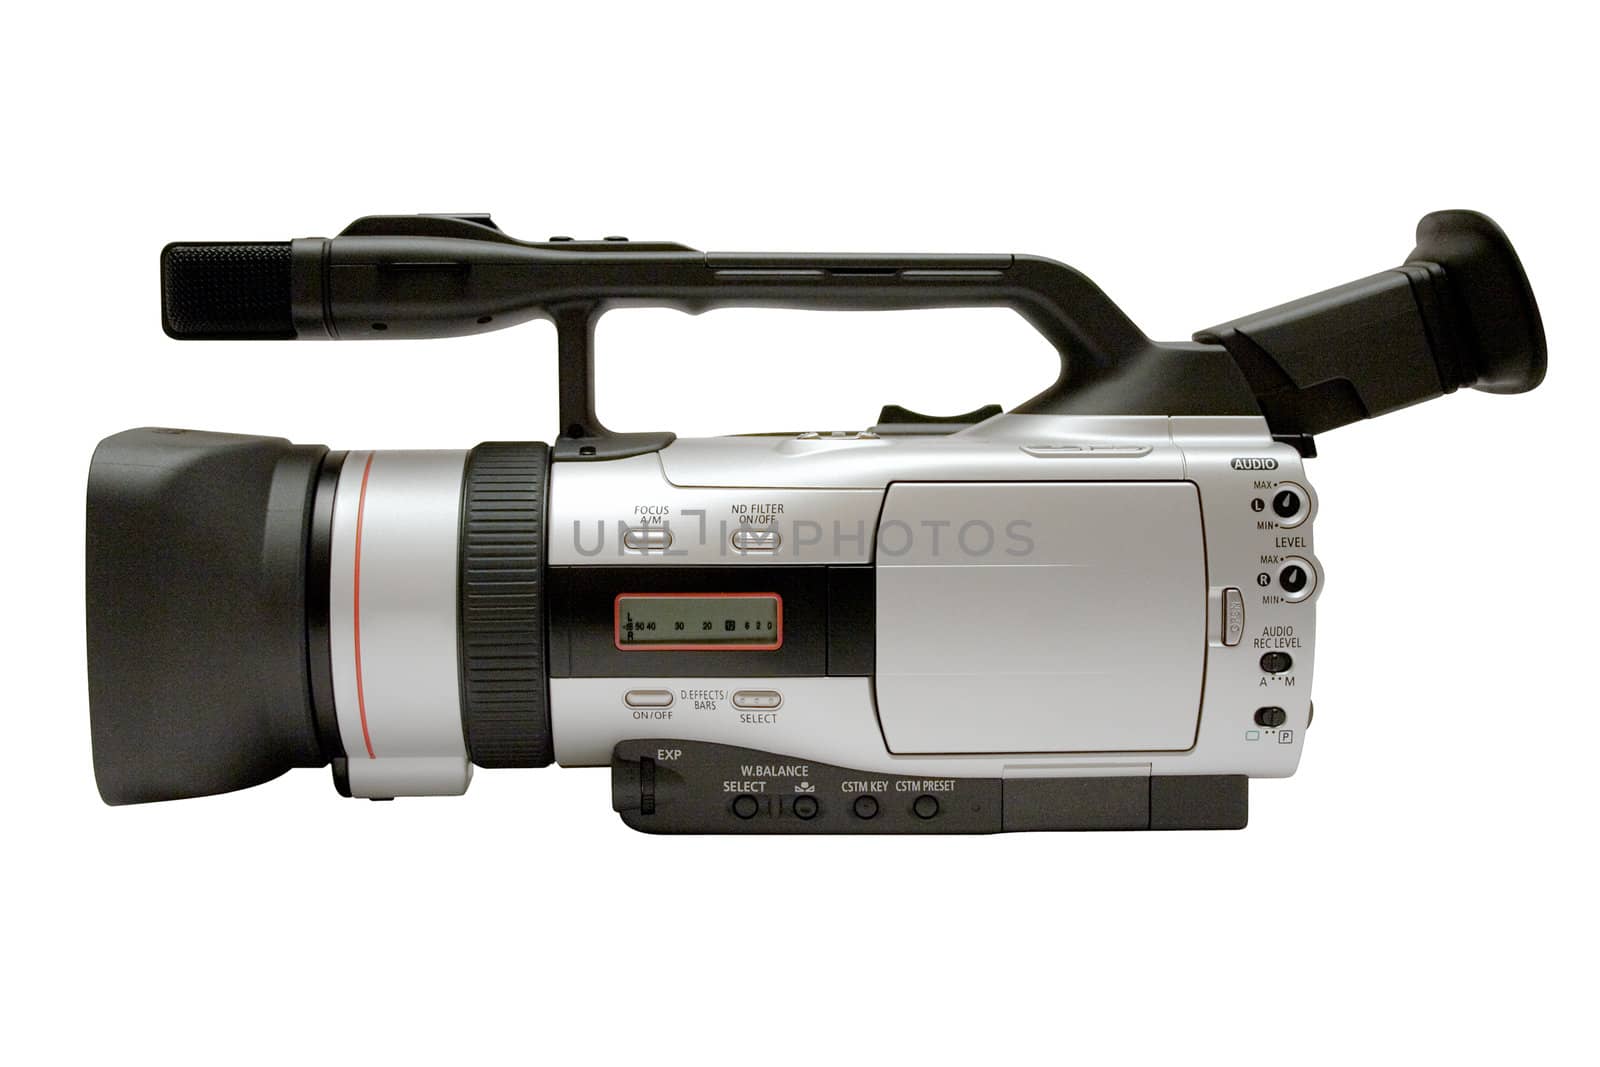 Professional camcorder isolated on a white background. File contains clipping path.